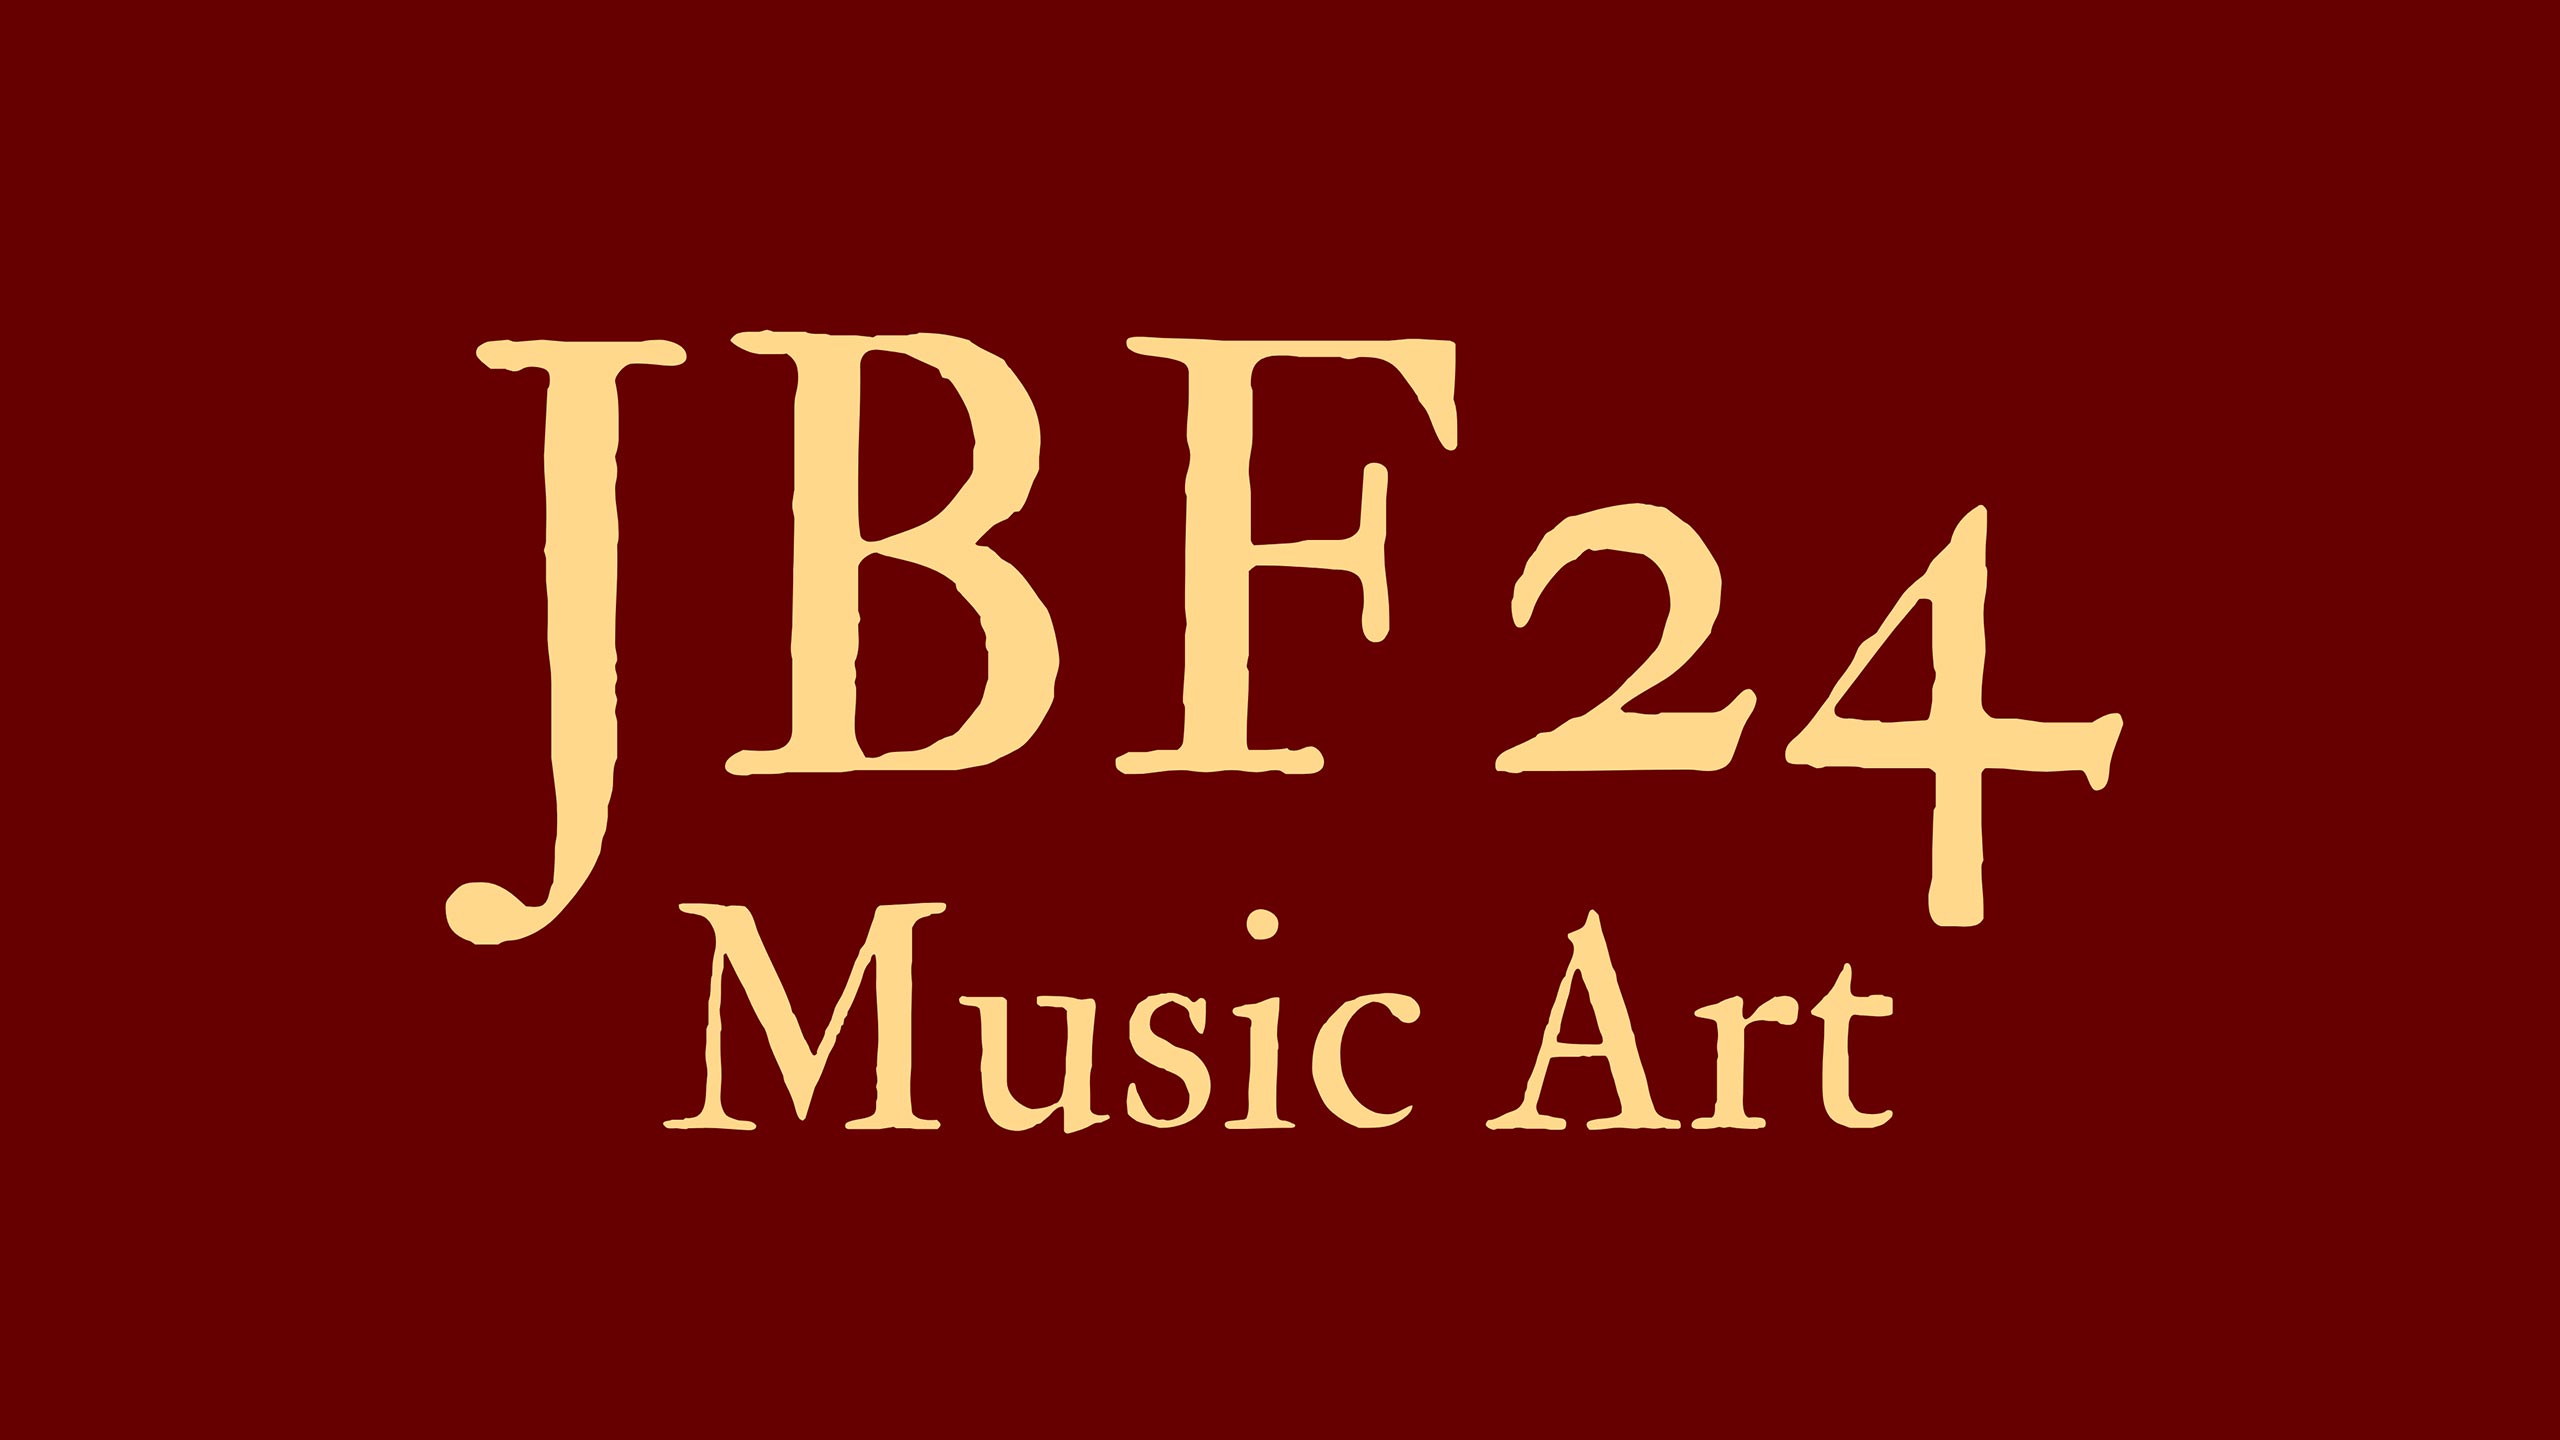 JBF24 Music Art -  Jazz, Blues, Funk, Soul, Smooth Jazz - Entertainment musical group for events, corporate conventions, parties and weddings.